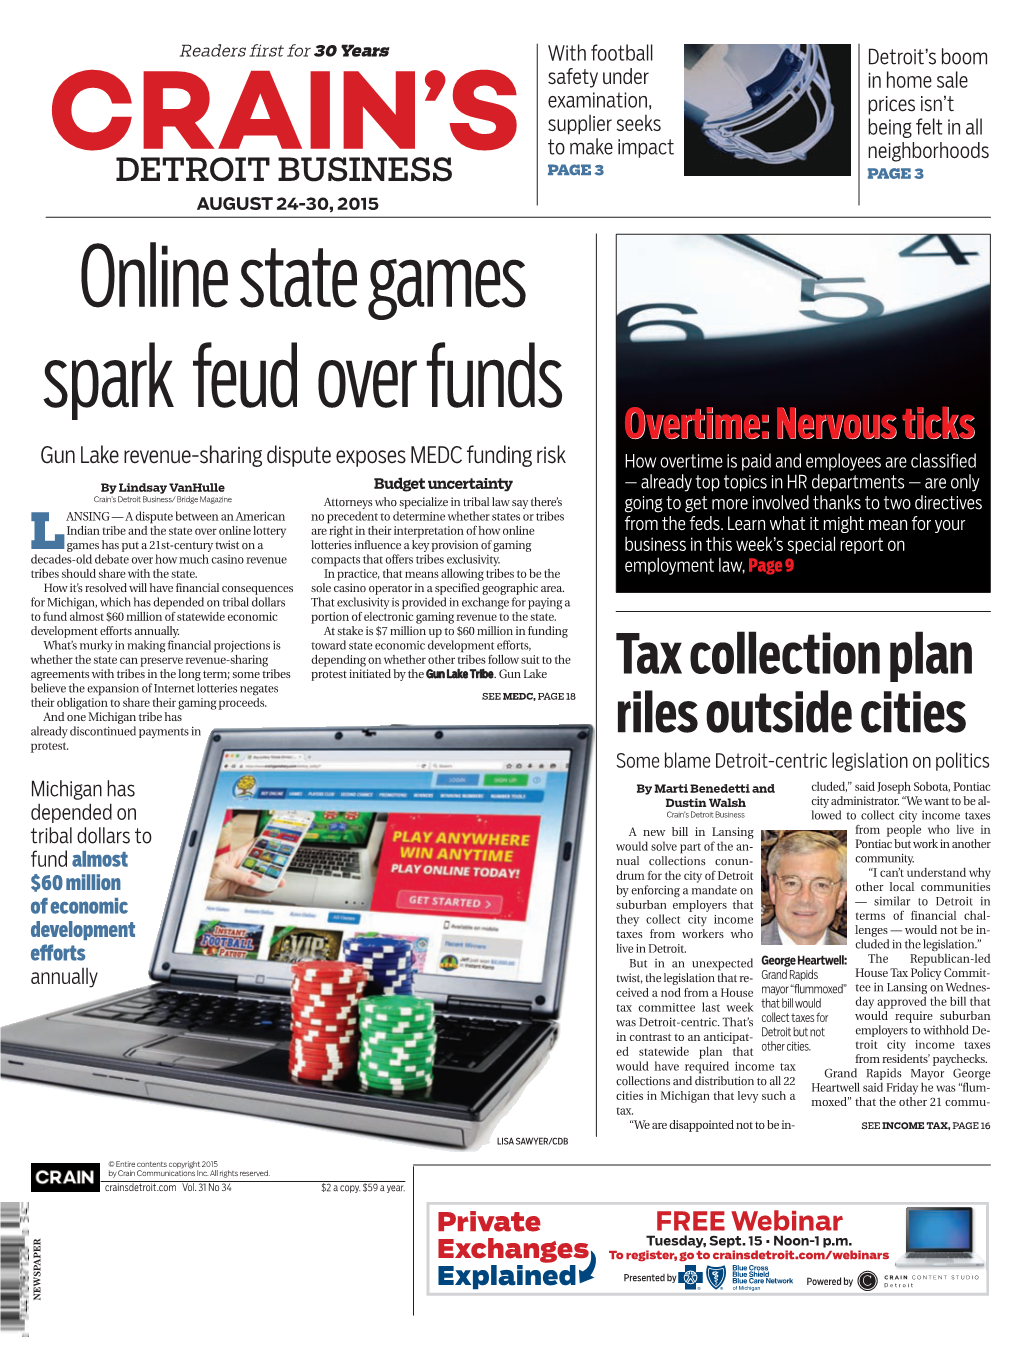 Online State Games Spark Feud Over Funds